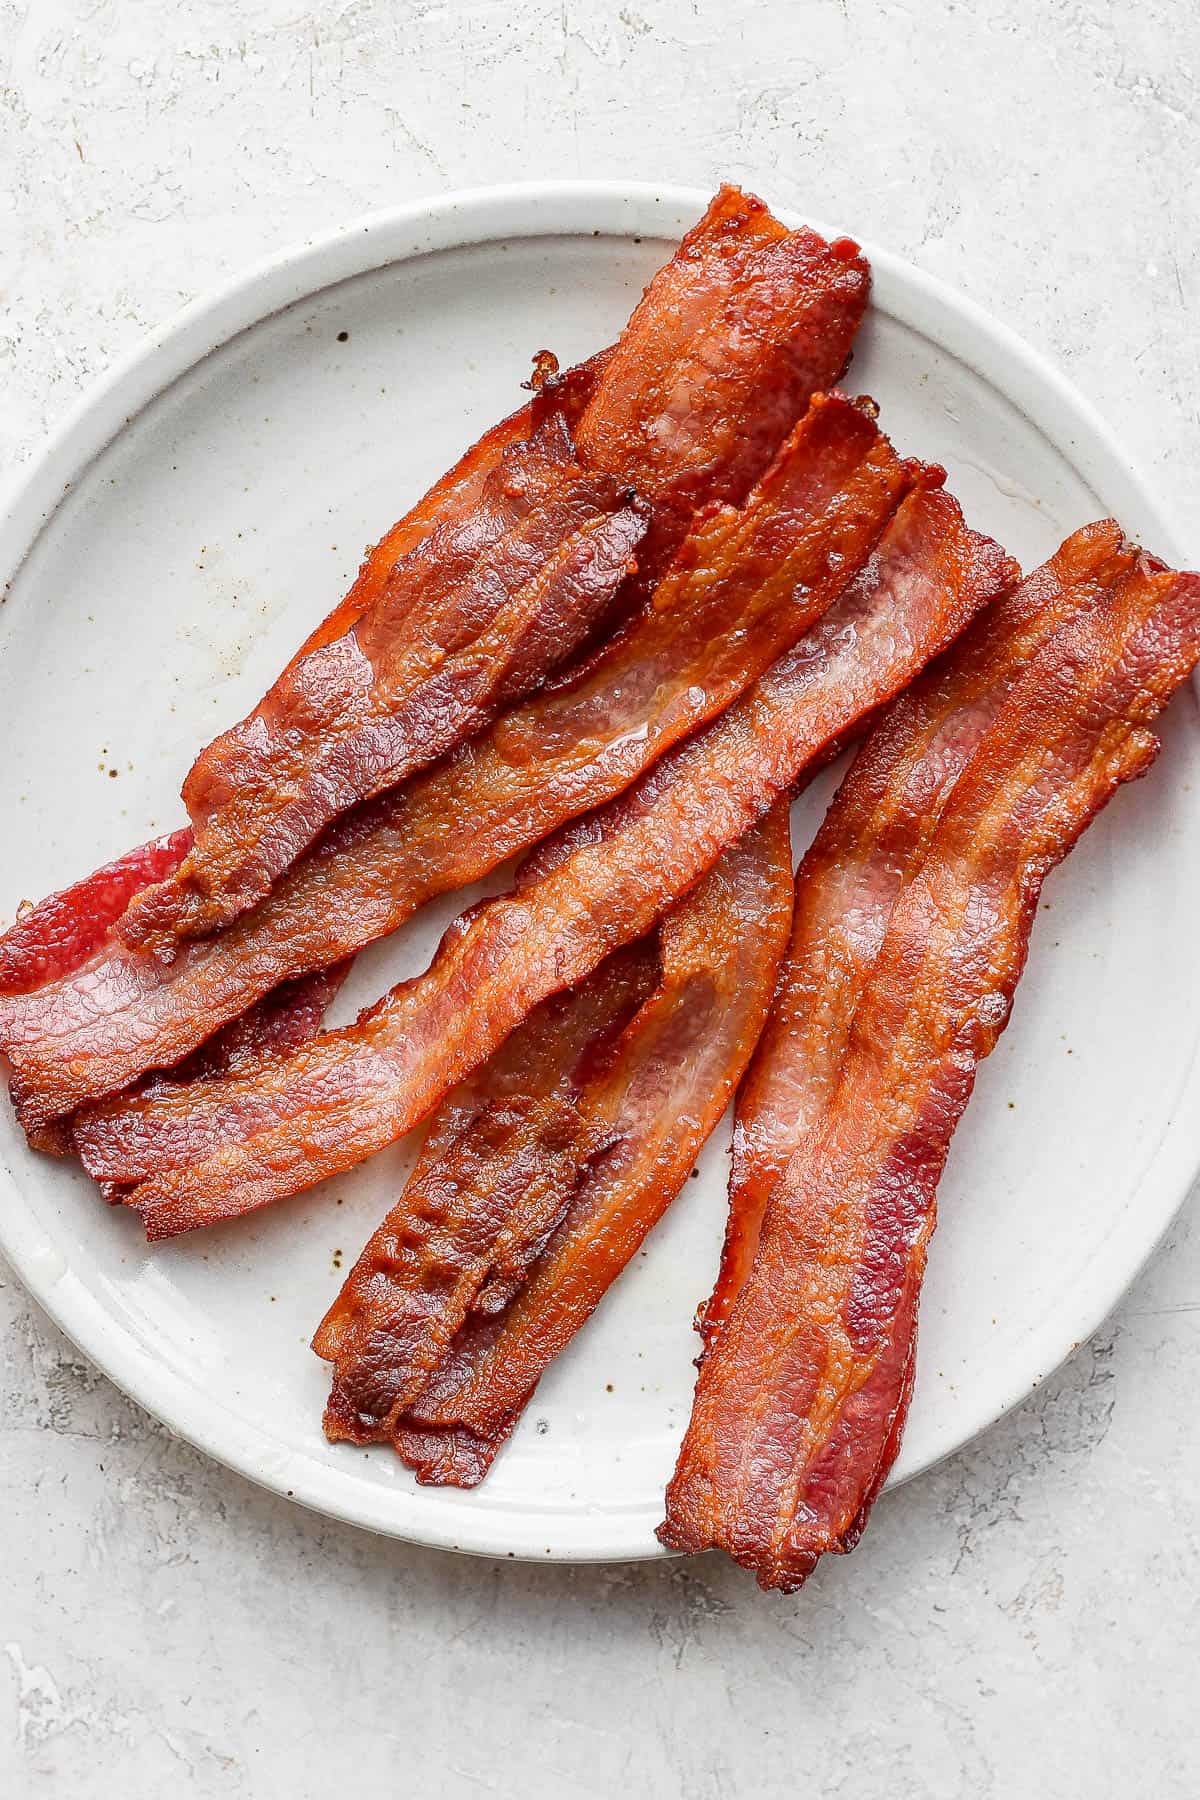 Cooked bacon strips on a white plate.